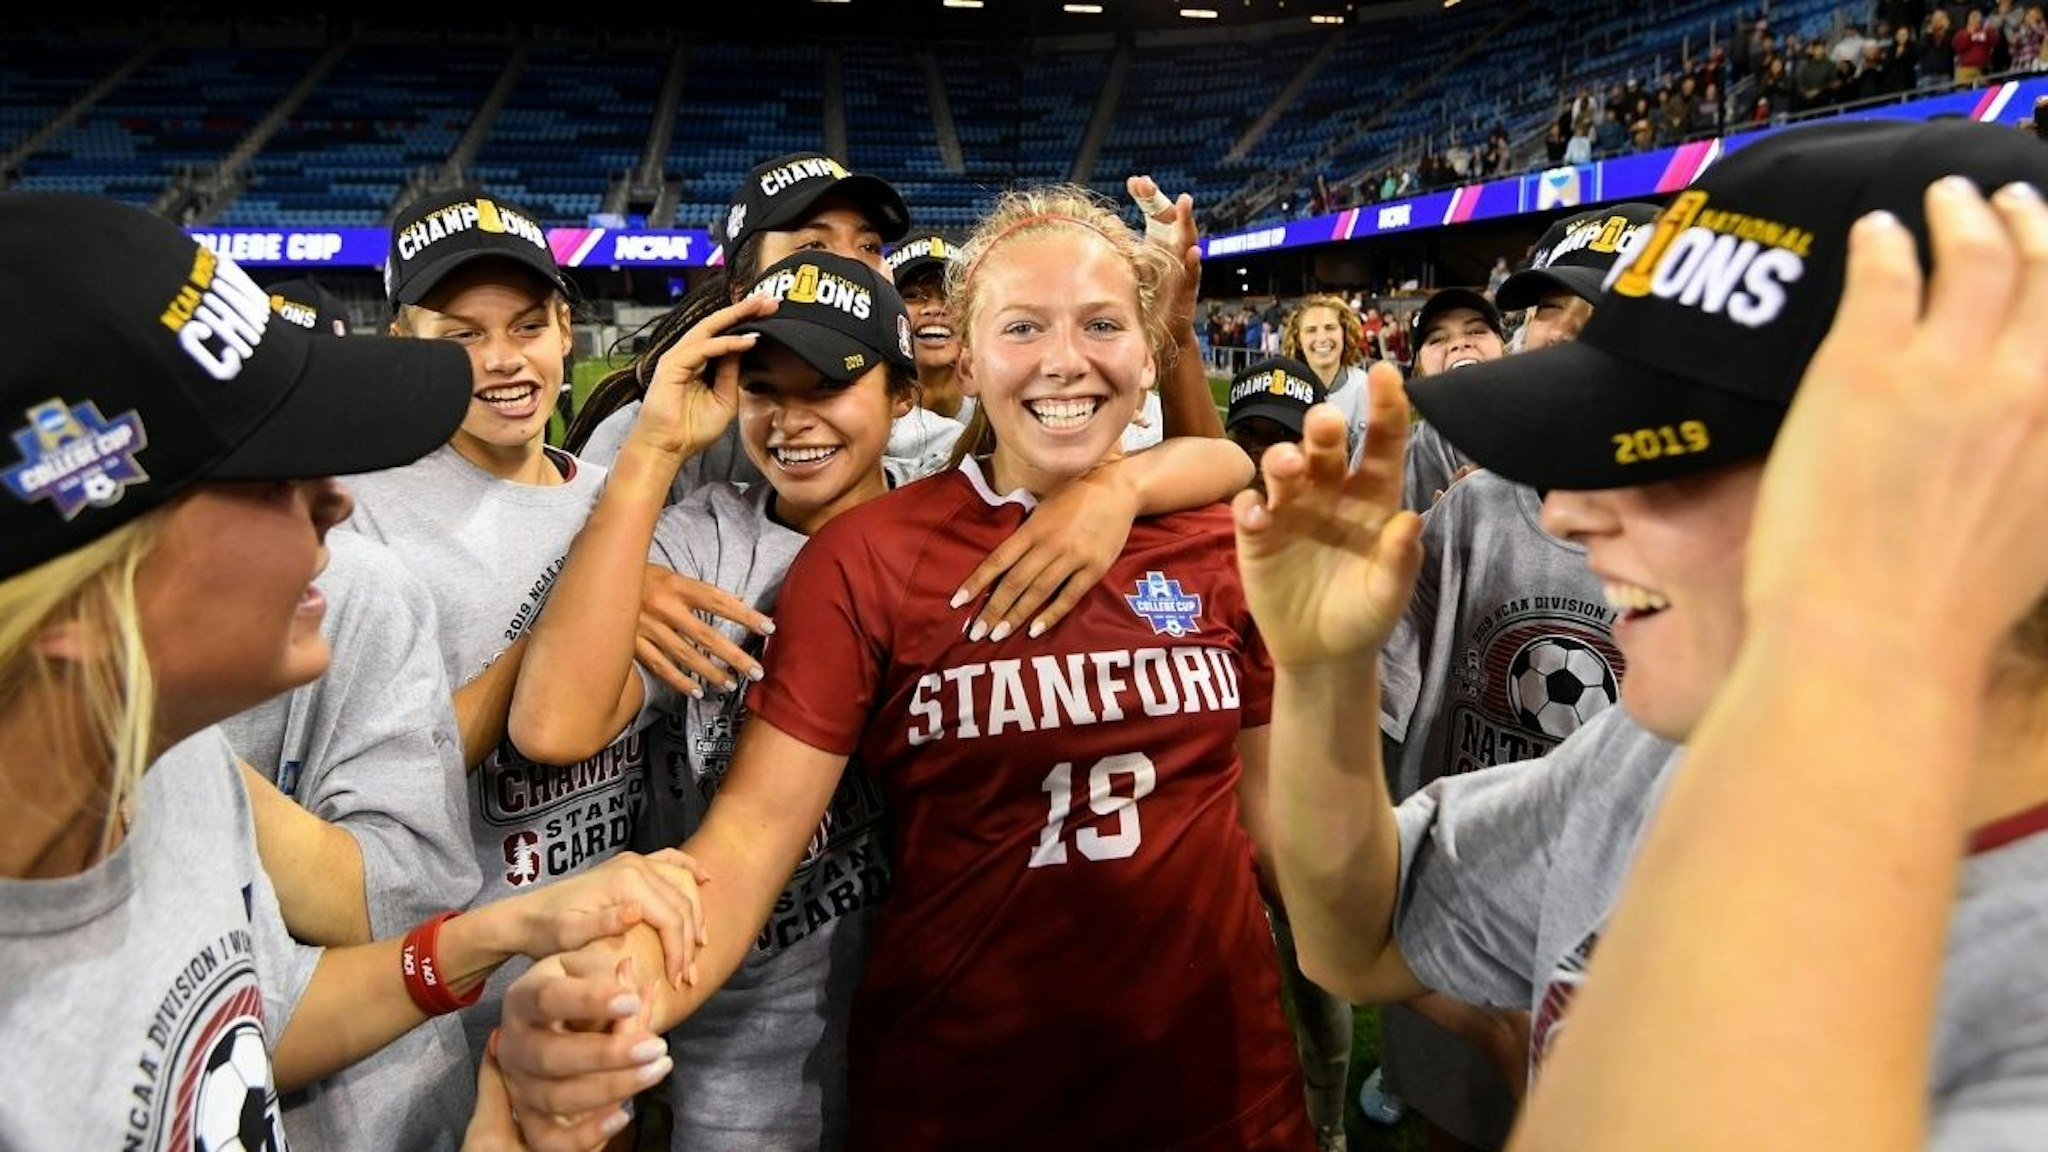 Goalie Katie Meyer #19 of the Stanford Cardinal celebrates with her teammates after defeating the North Carolina Tar Heels during the Division I Women's Soccer Championship held at Avaya Stadium on December 8, 2019 in San Jose, California.